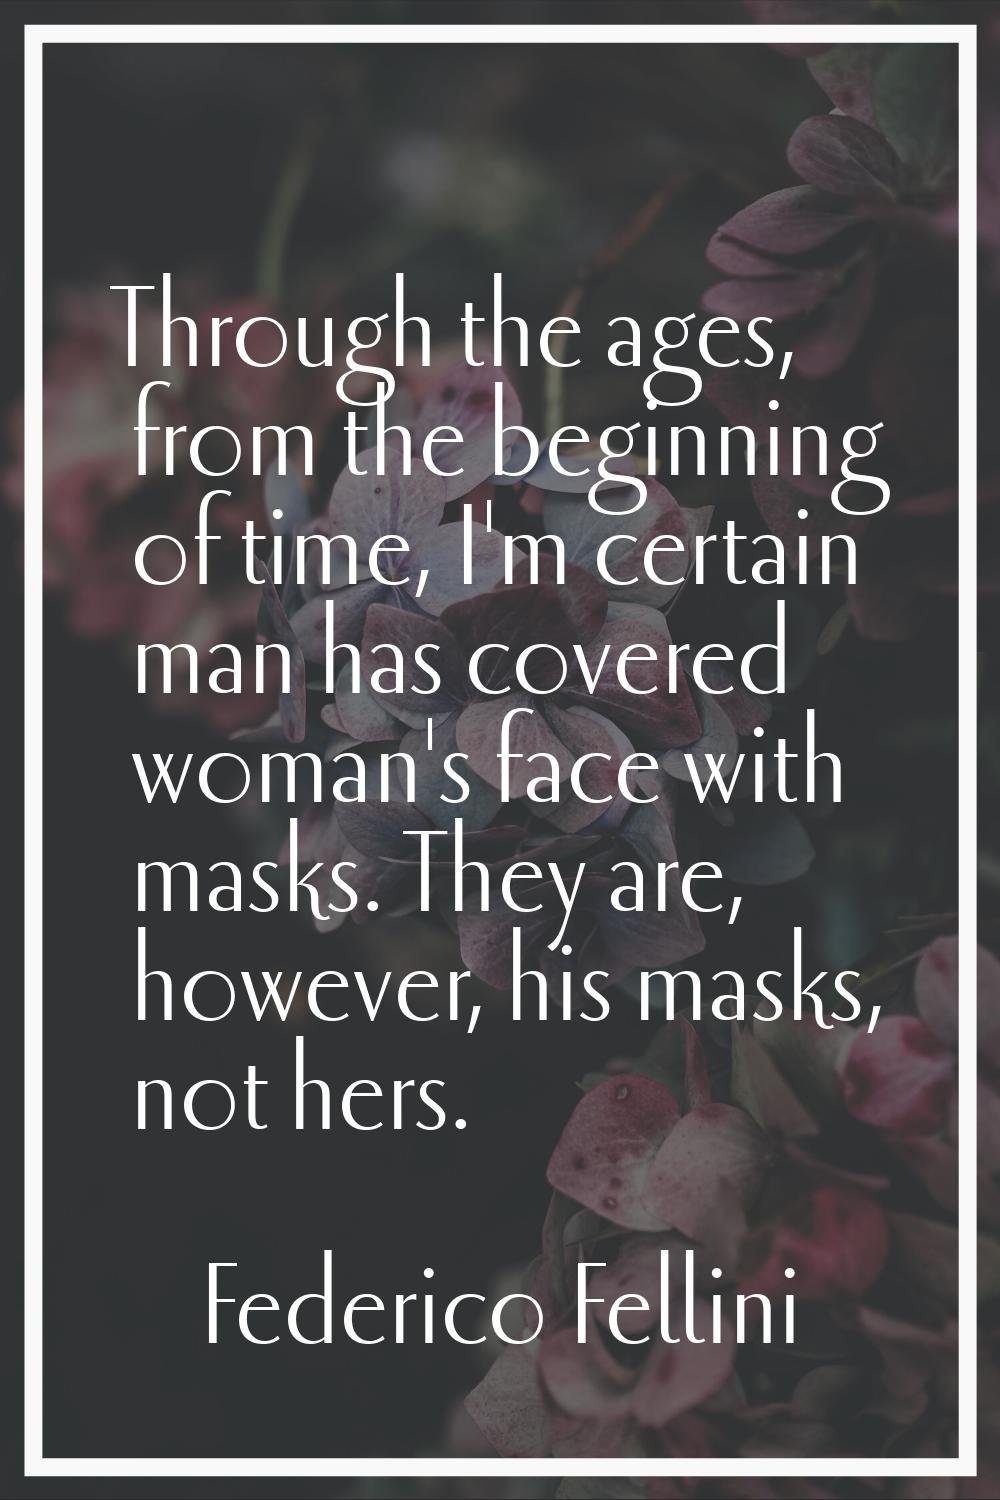 Through the ages, from the beginning of time, I'm certain man has covered woman's face with masks. 